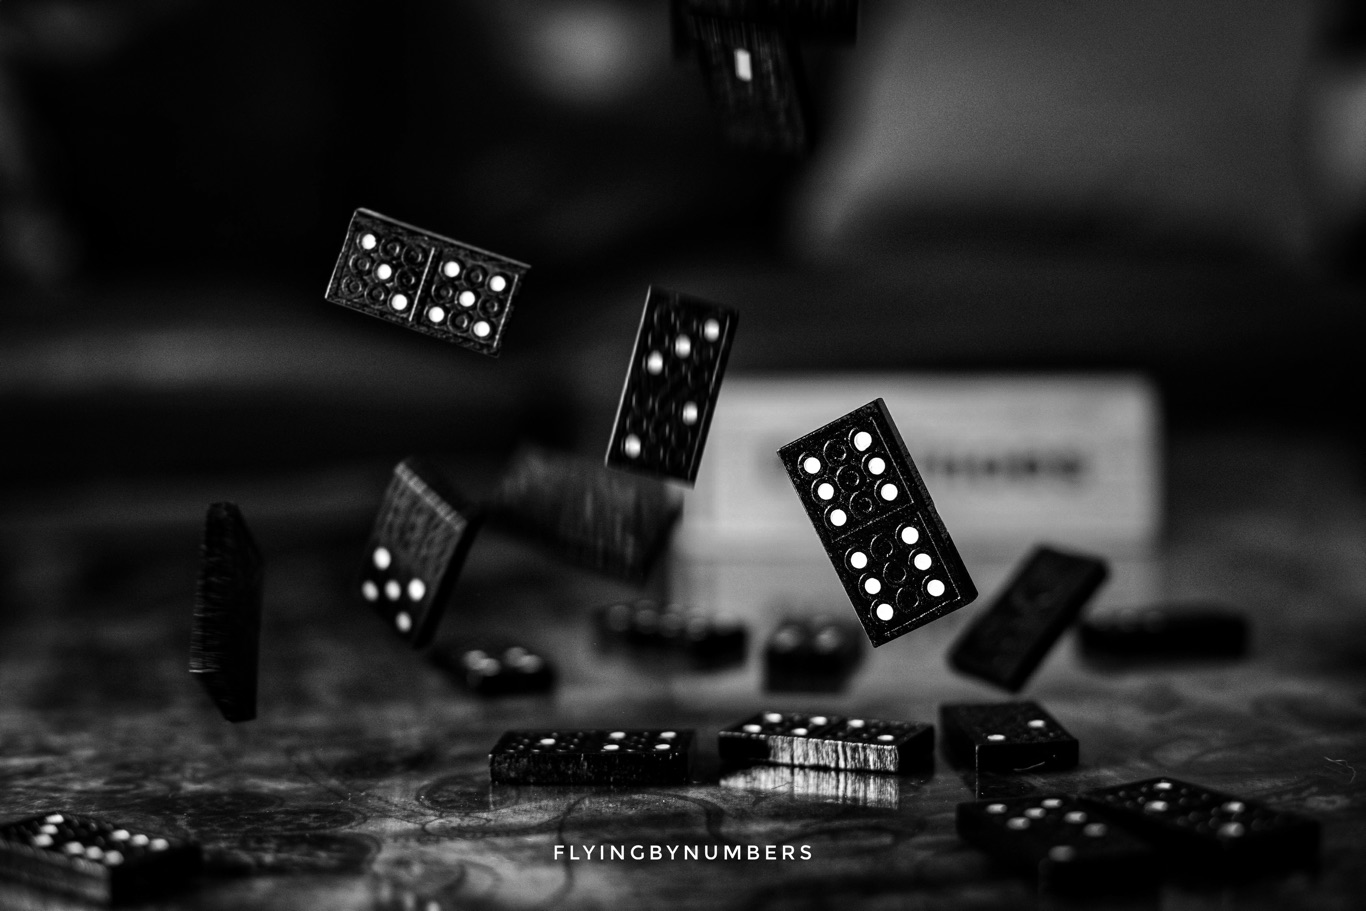 scattered dominoes representing the non-linear problems with making pilots obsolete